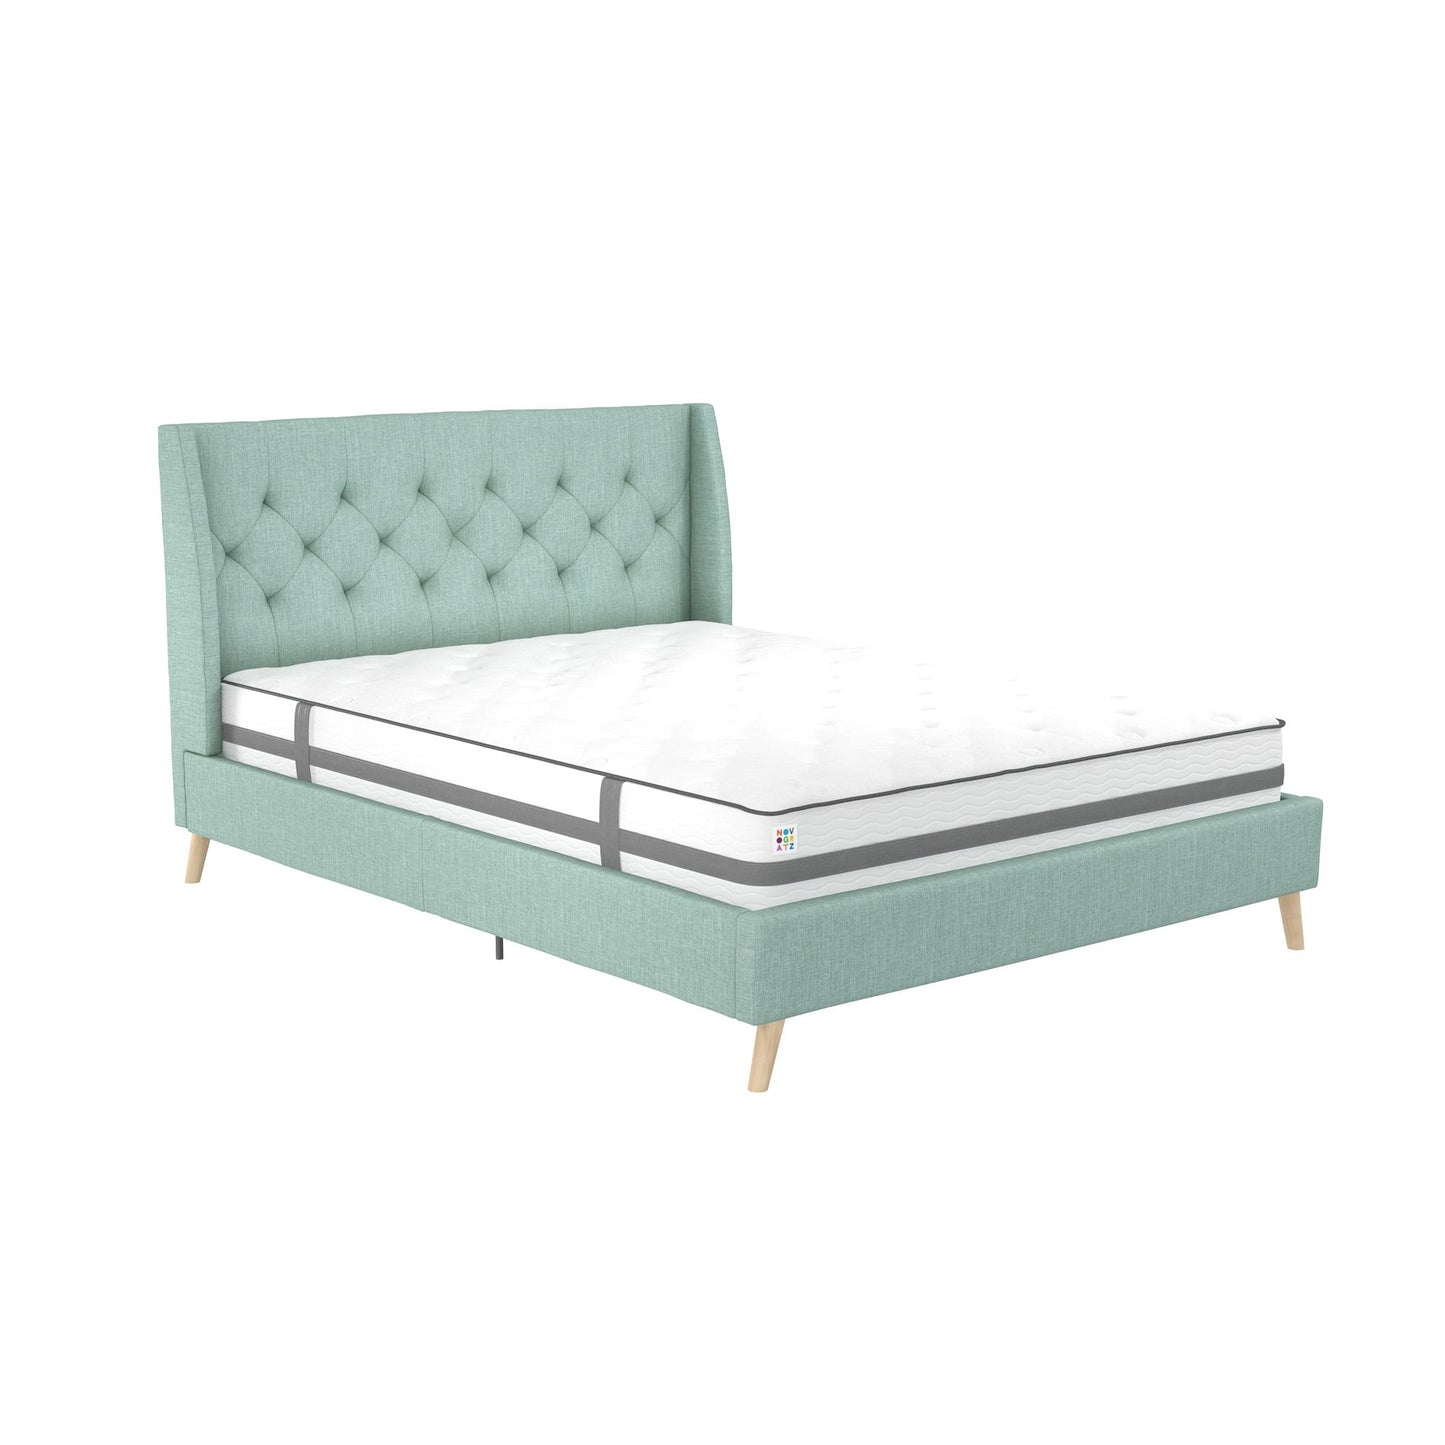 Her Majesty Bed - Green - Full